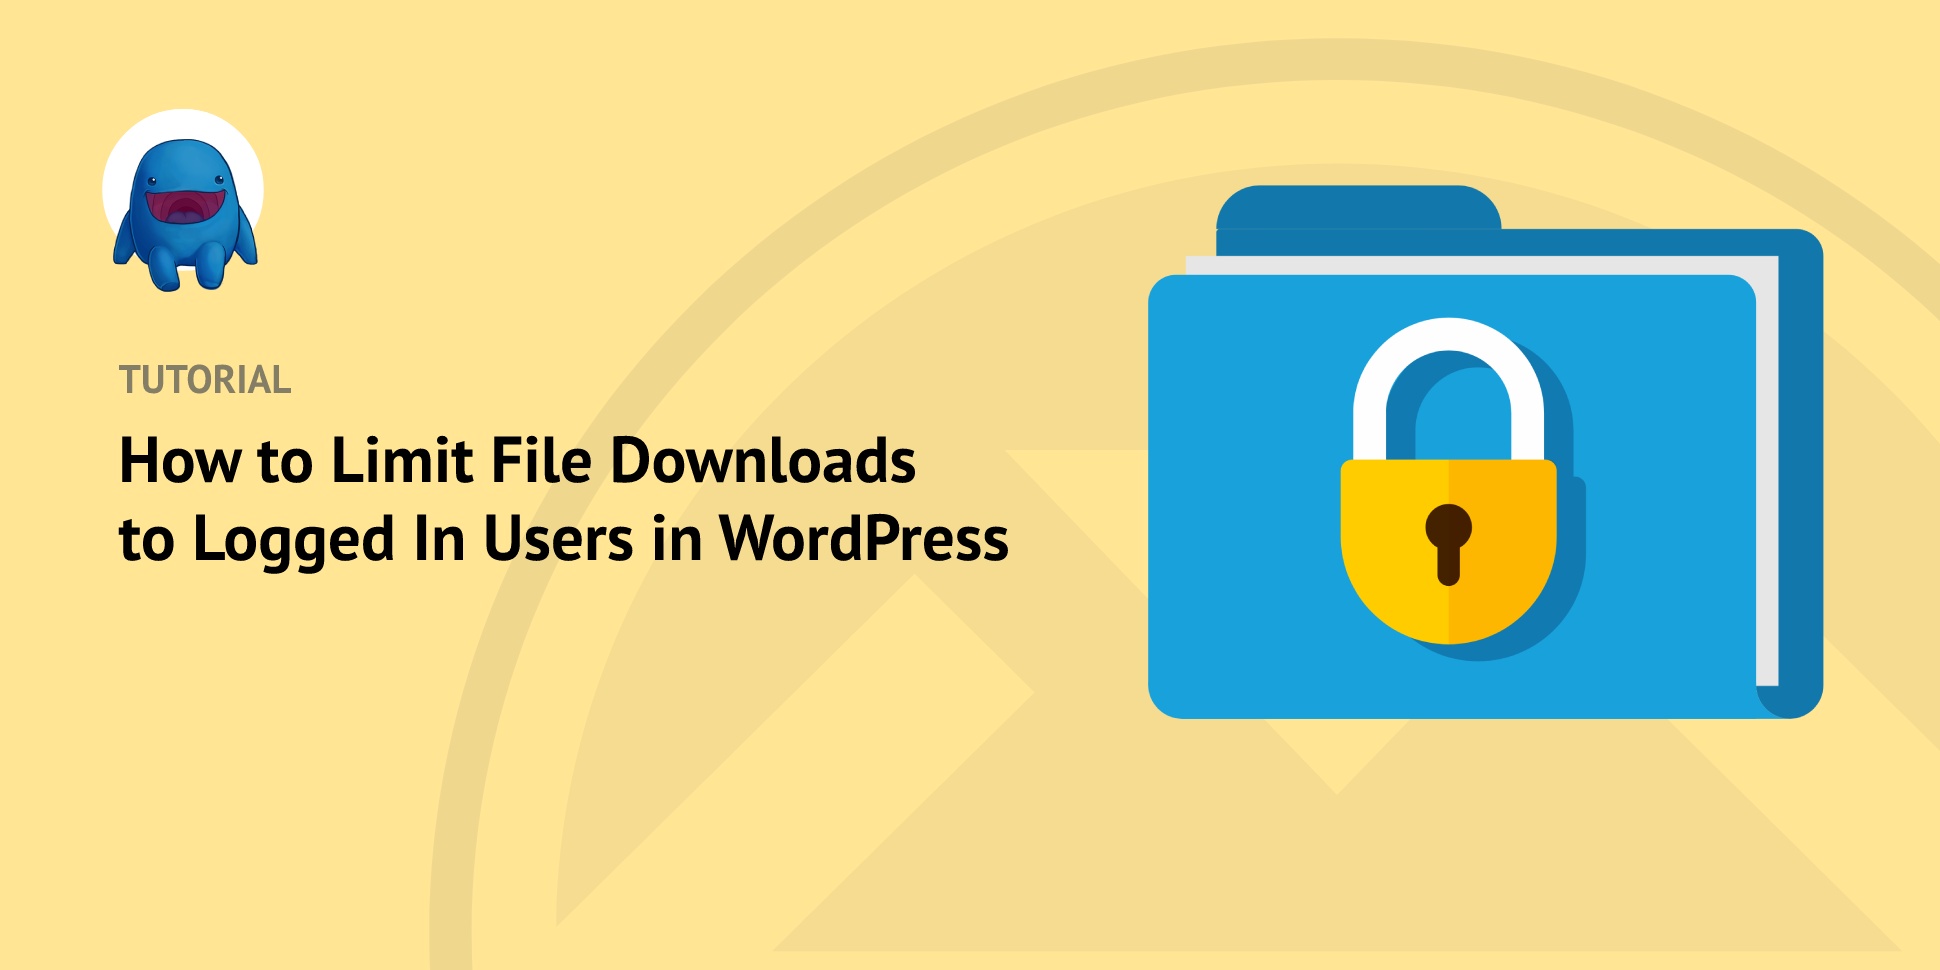 How to Limit File Downloads to Logged in Users in WordPress